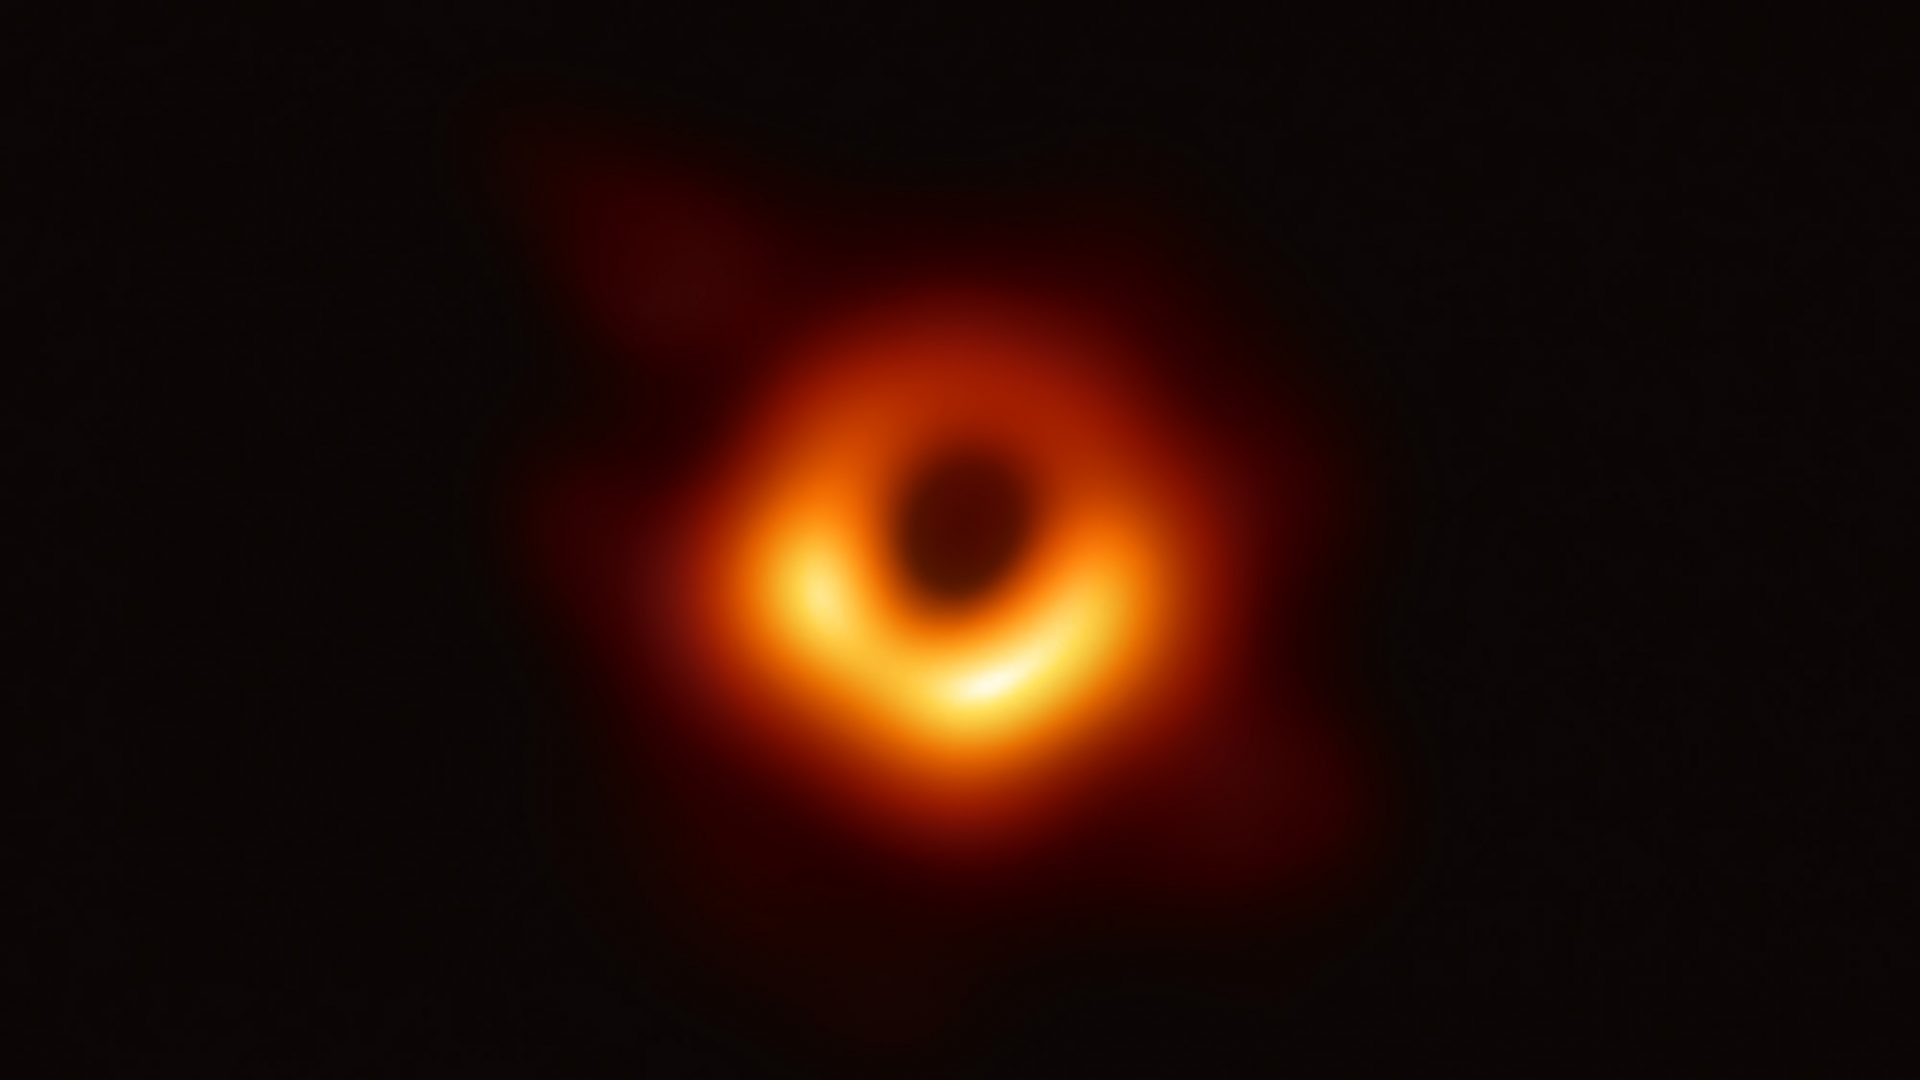 Shock! The ring round M87 galaxy’s monster black hole wobbles over time.